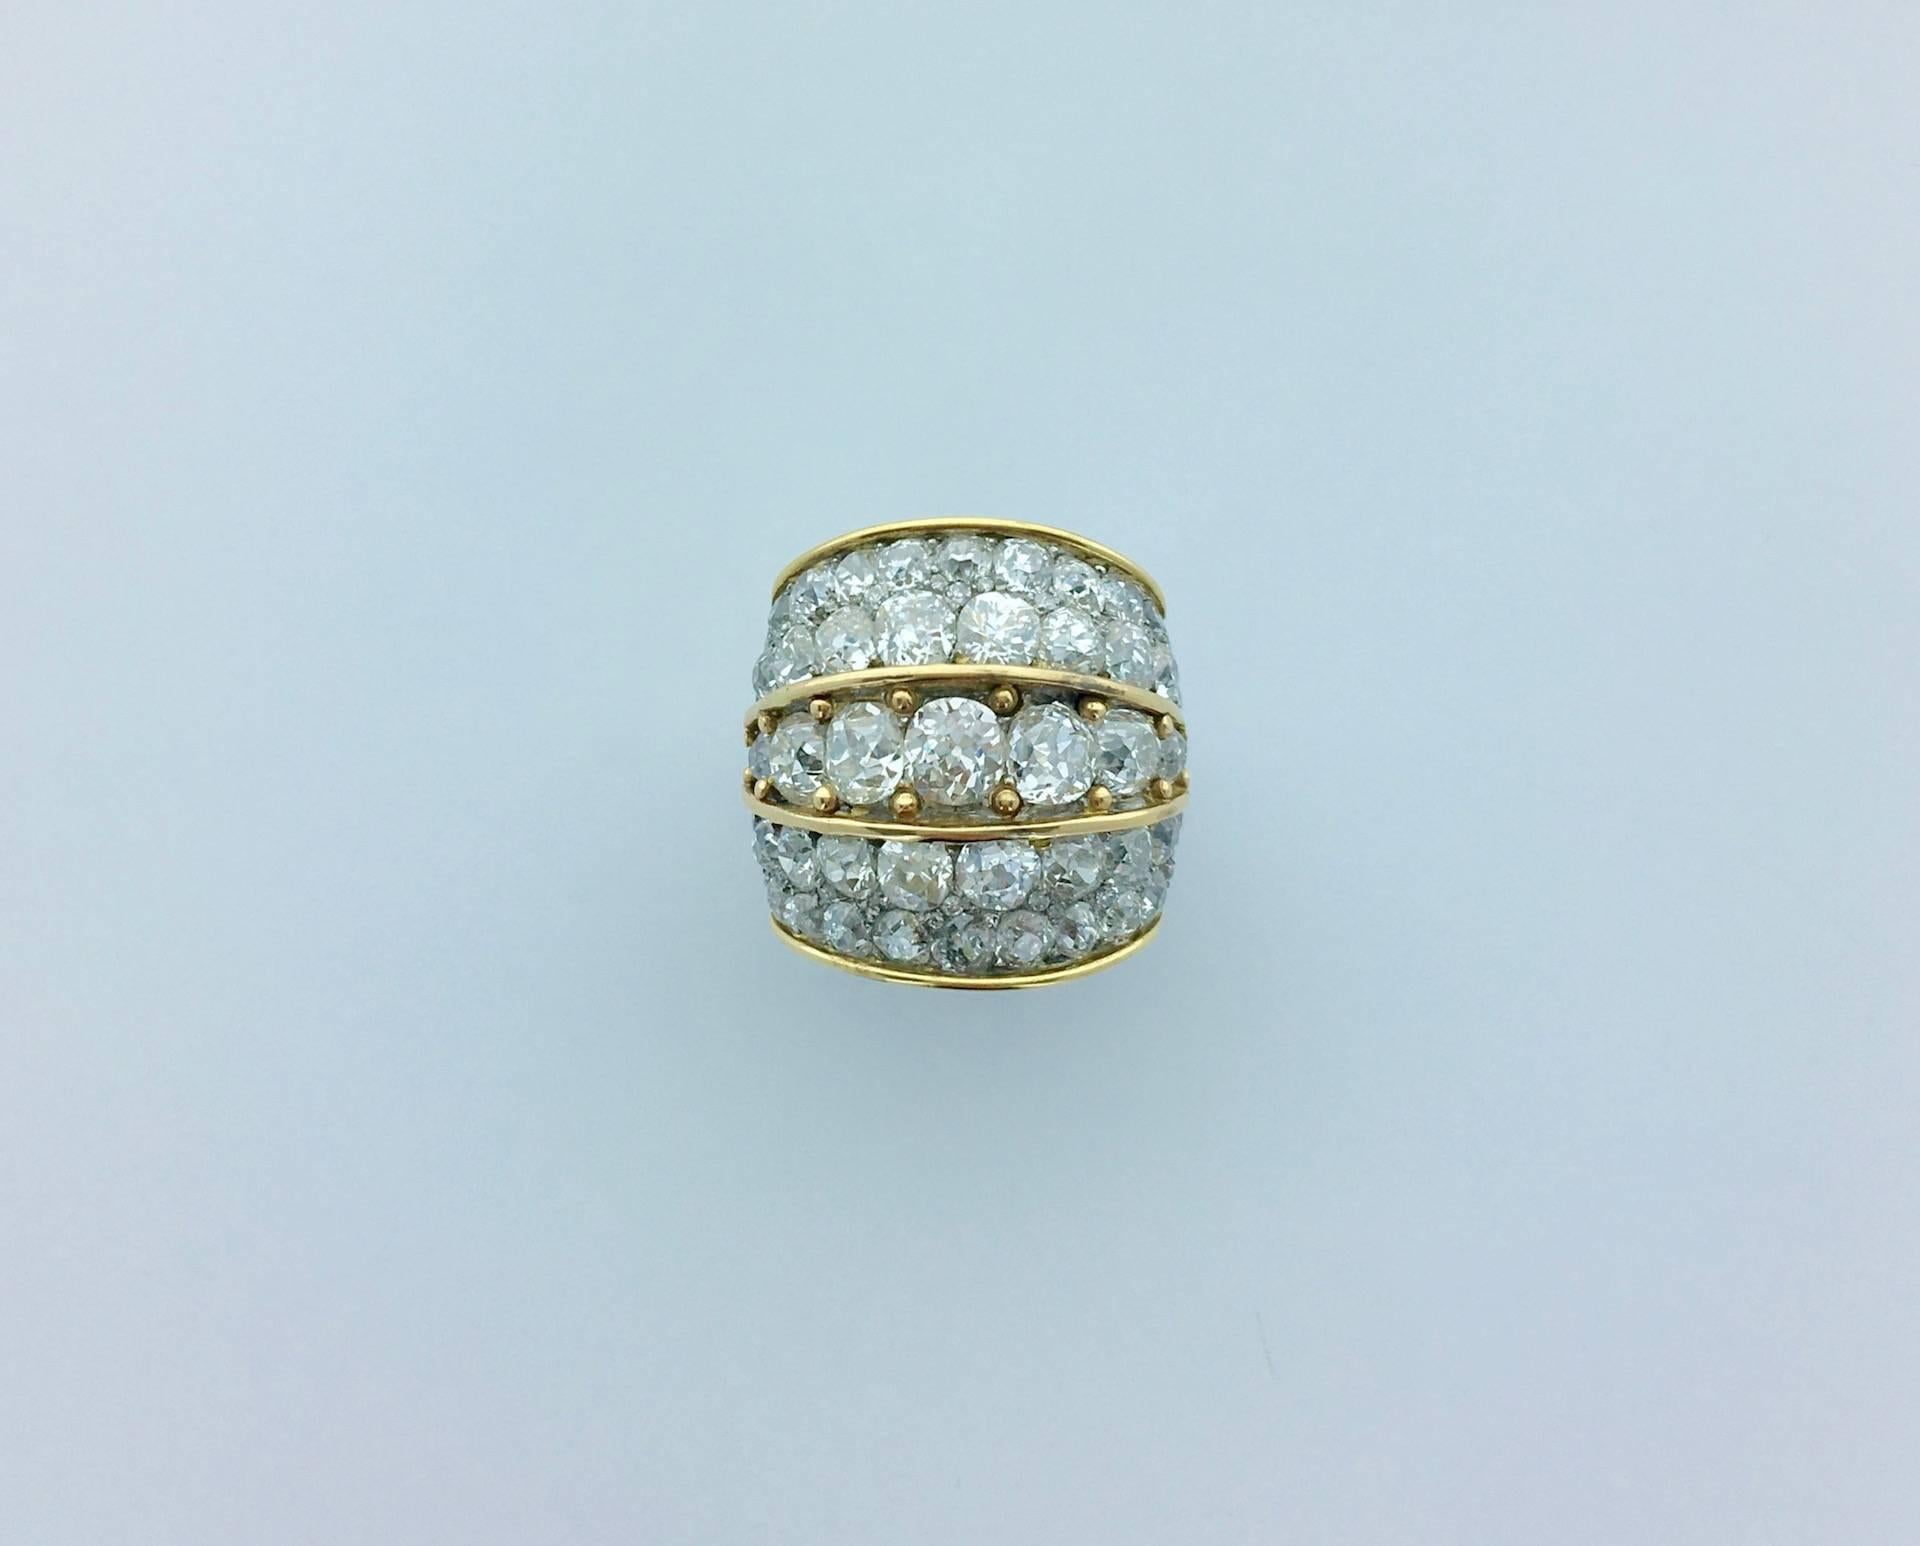 Massive, Impressive and Stunning! This Chevalière is dazzling.
All pave by Old-mine cut Diamond (approximately 9.00 carats) mounted on Platinum and Yellow Gold 18k 750.
Circa 1955.
French mark.

Gross weight: 25.36 grams.

